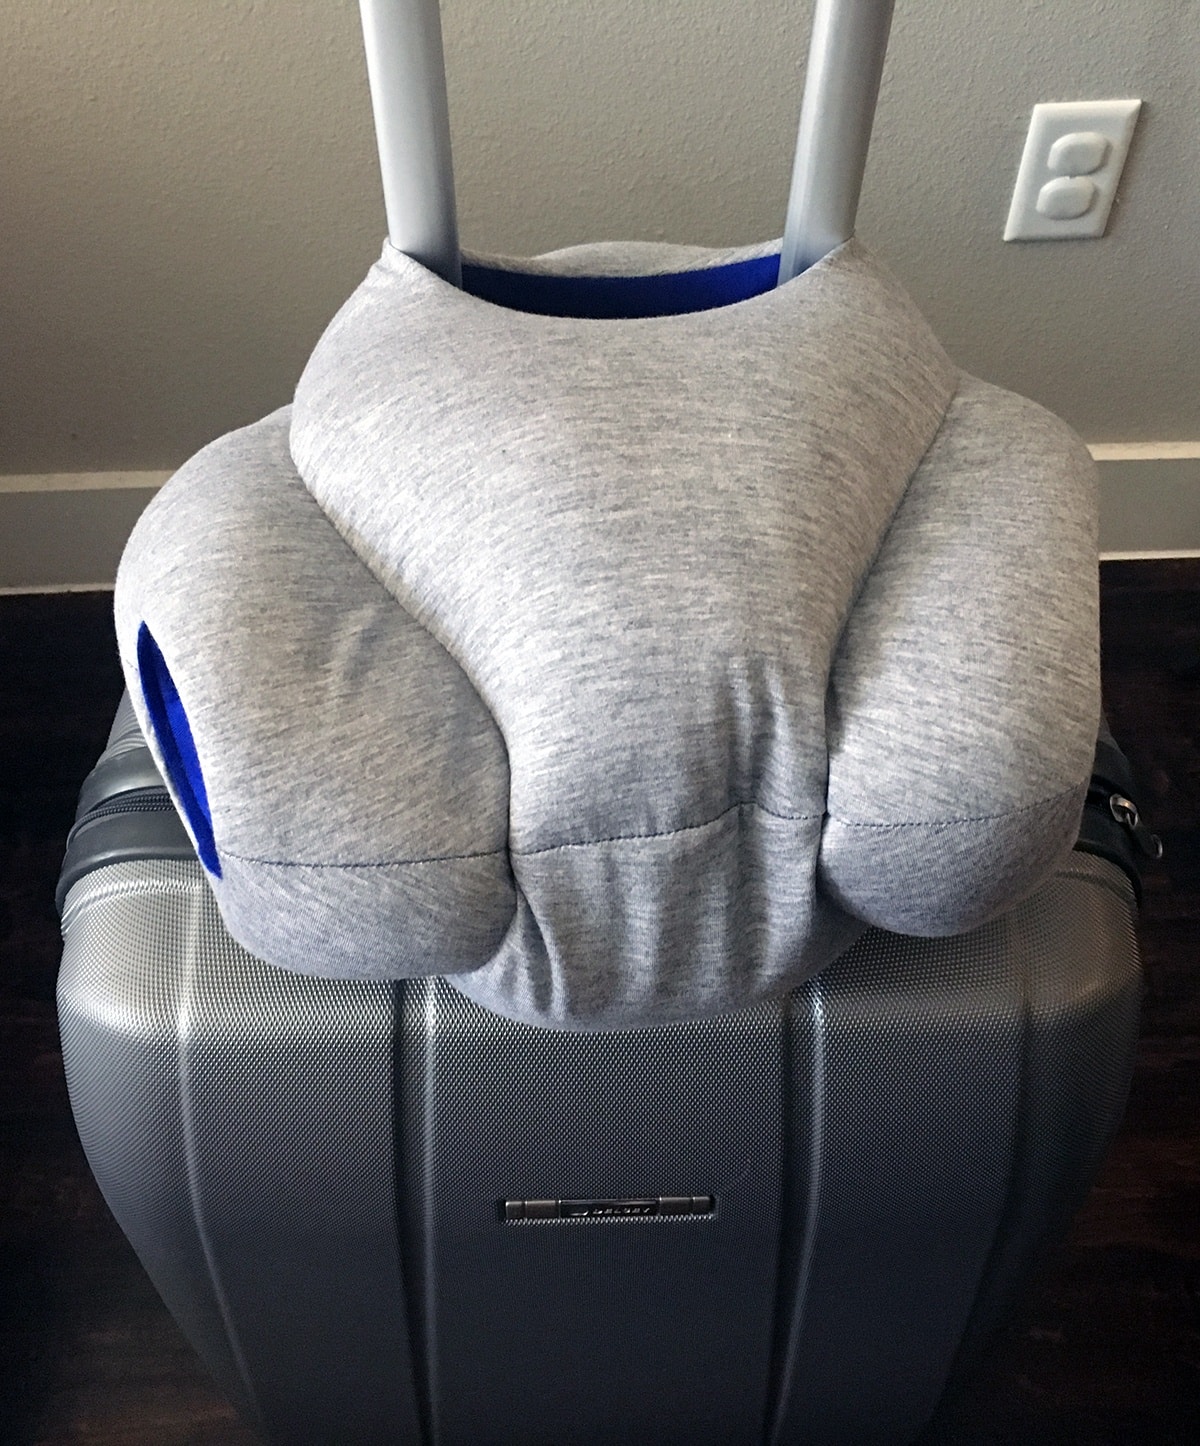 Ostrichpillow looped around suitcase handle